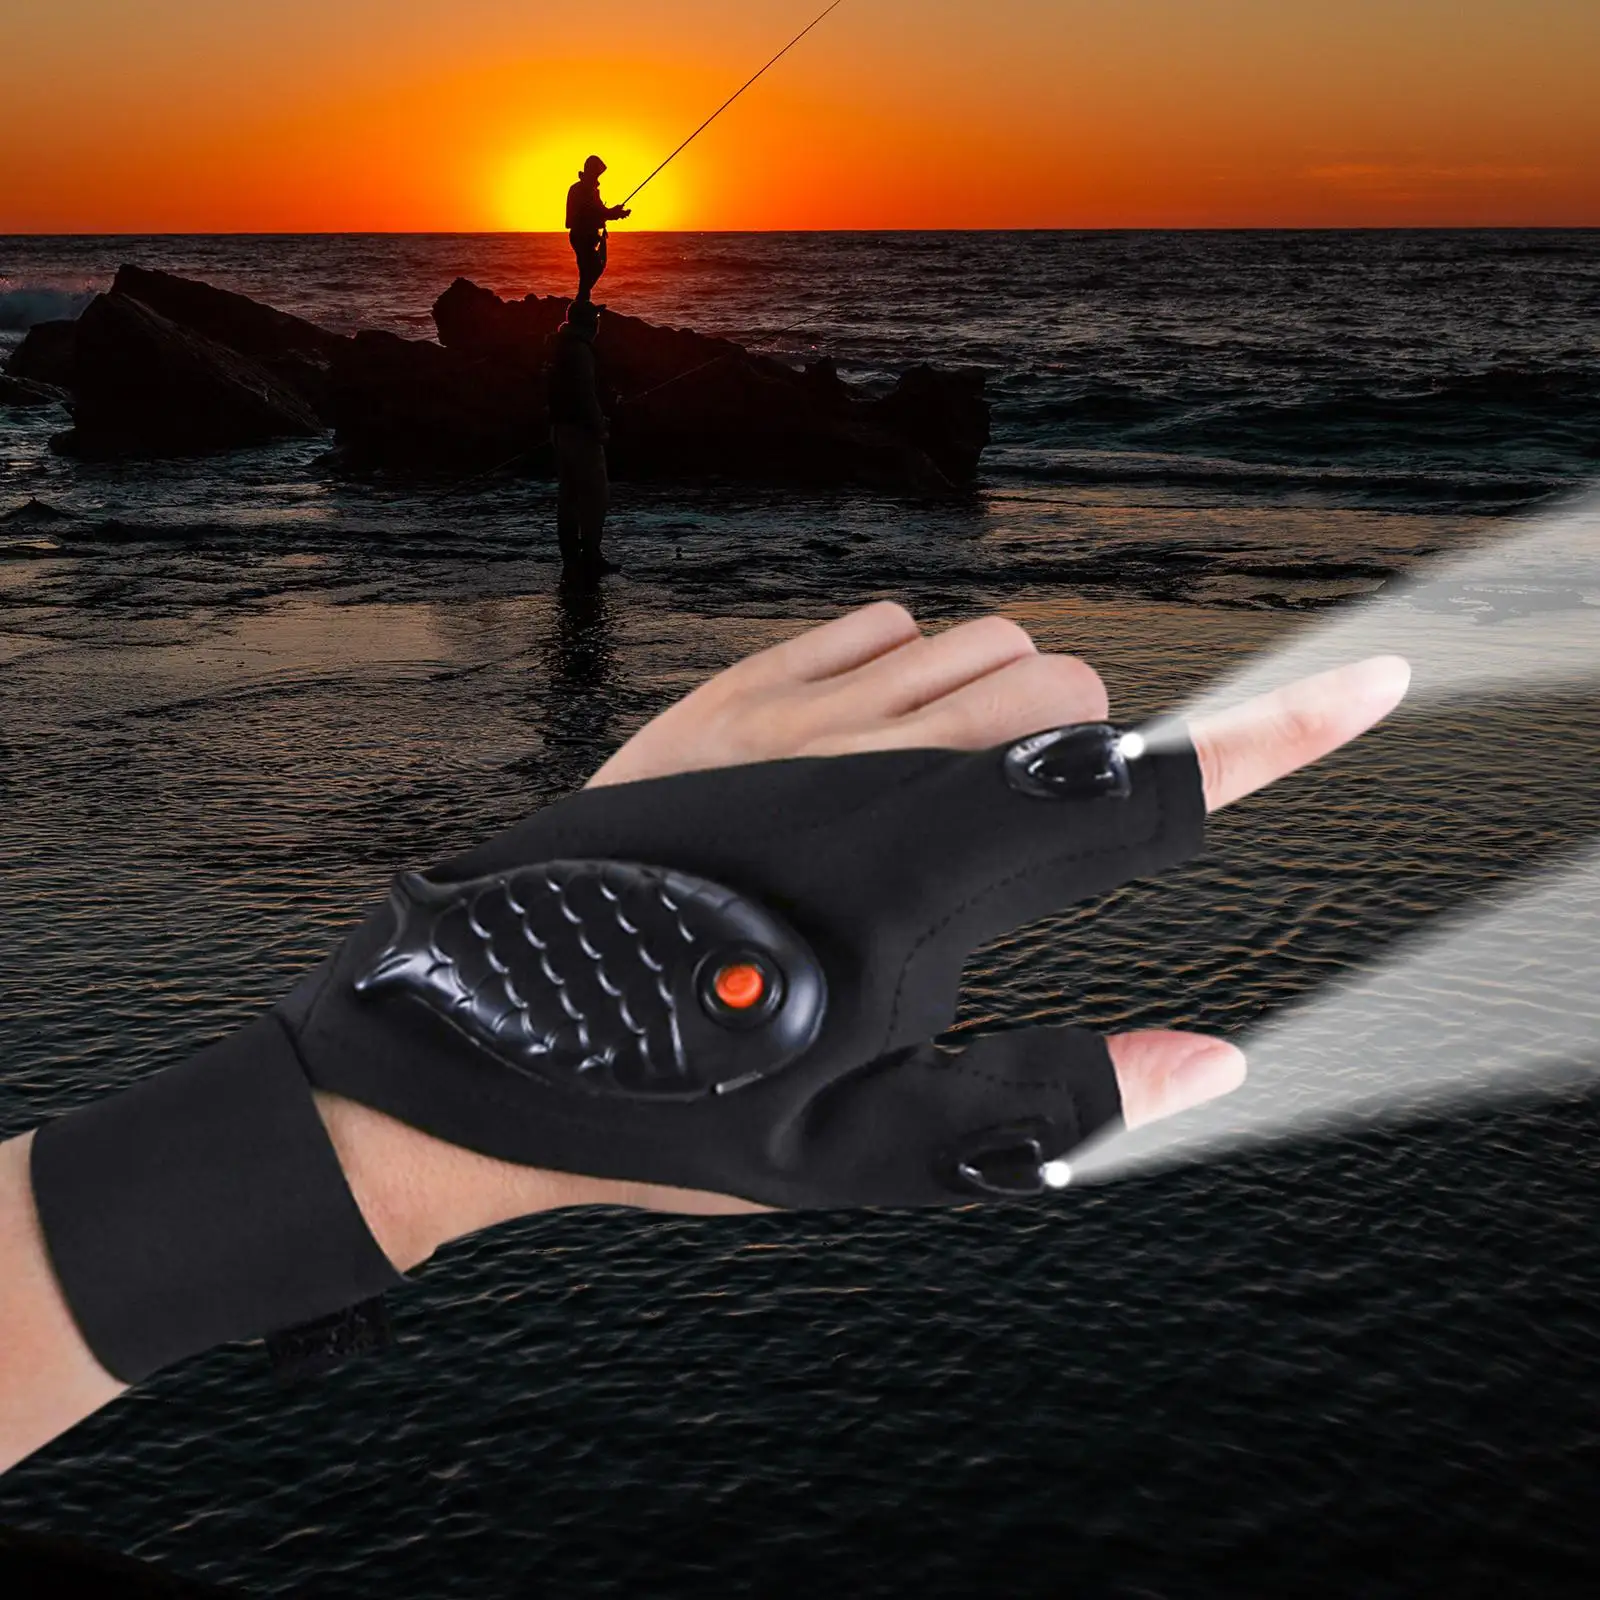 LED Flashlight Gloves Elastic Band Glove Cool Tools Fishing Gloves Hands Free for Husband Dad Men Night Fishing Outdoor Fishing